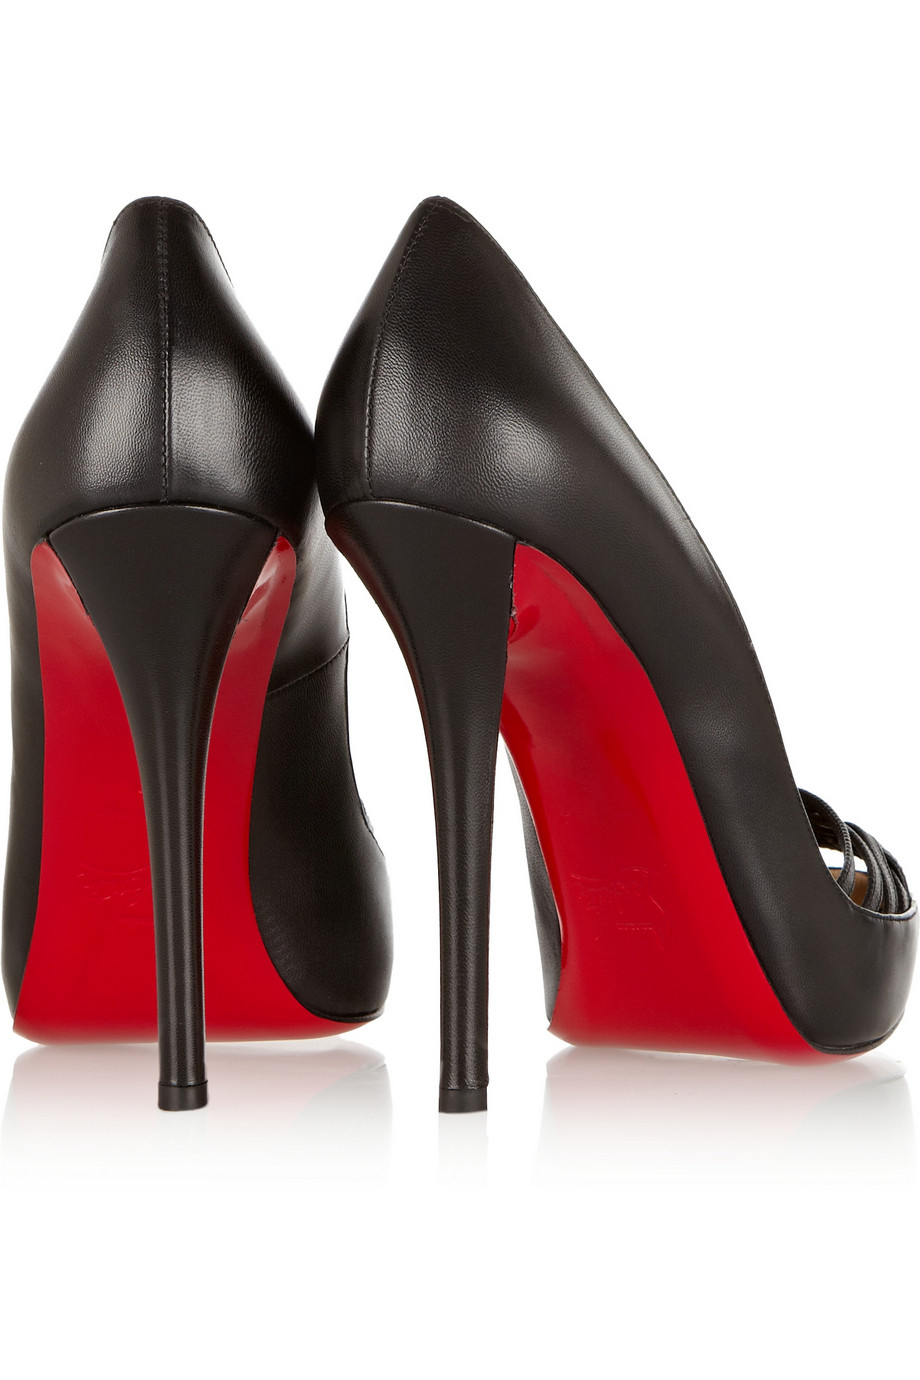 Lyst Christian Louboutin Luciana 120 Cutout Leather Pumps In Black